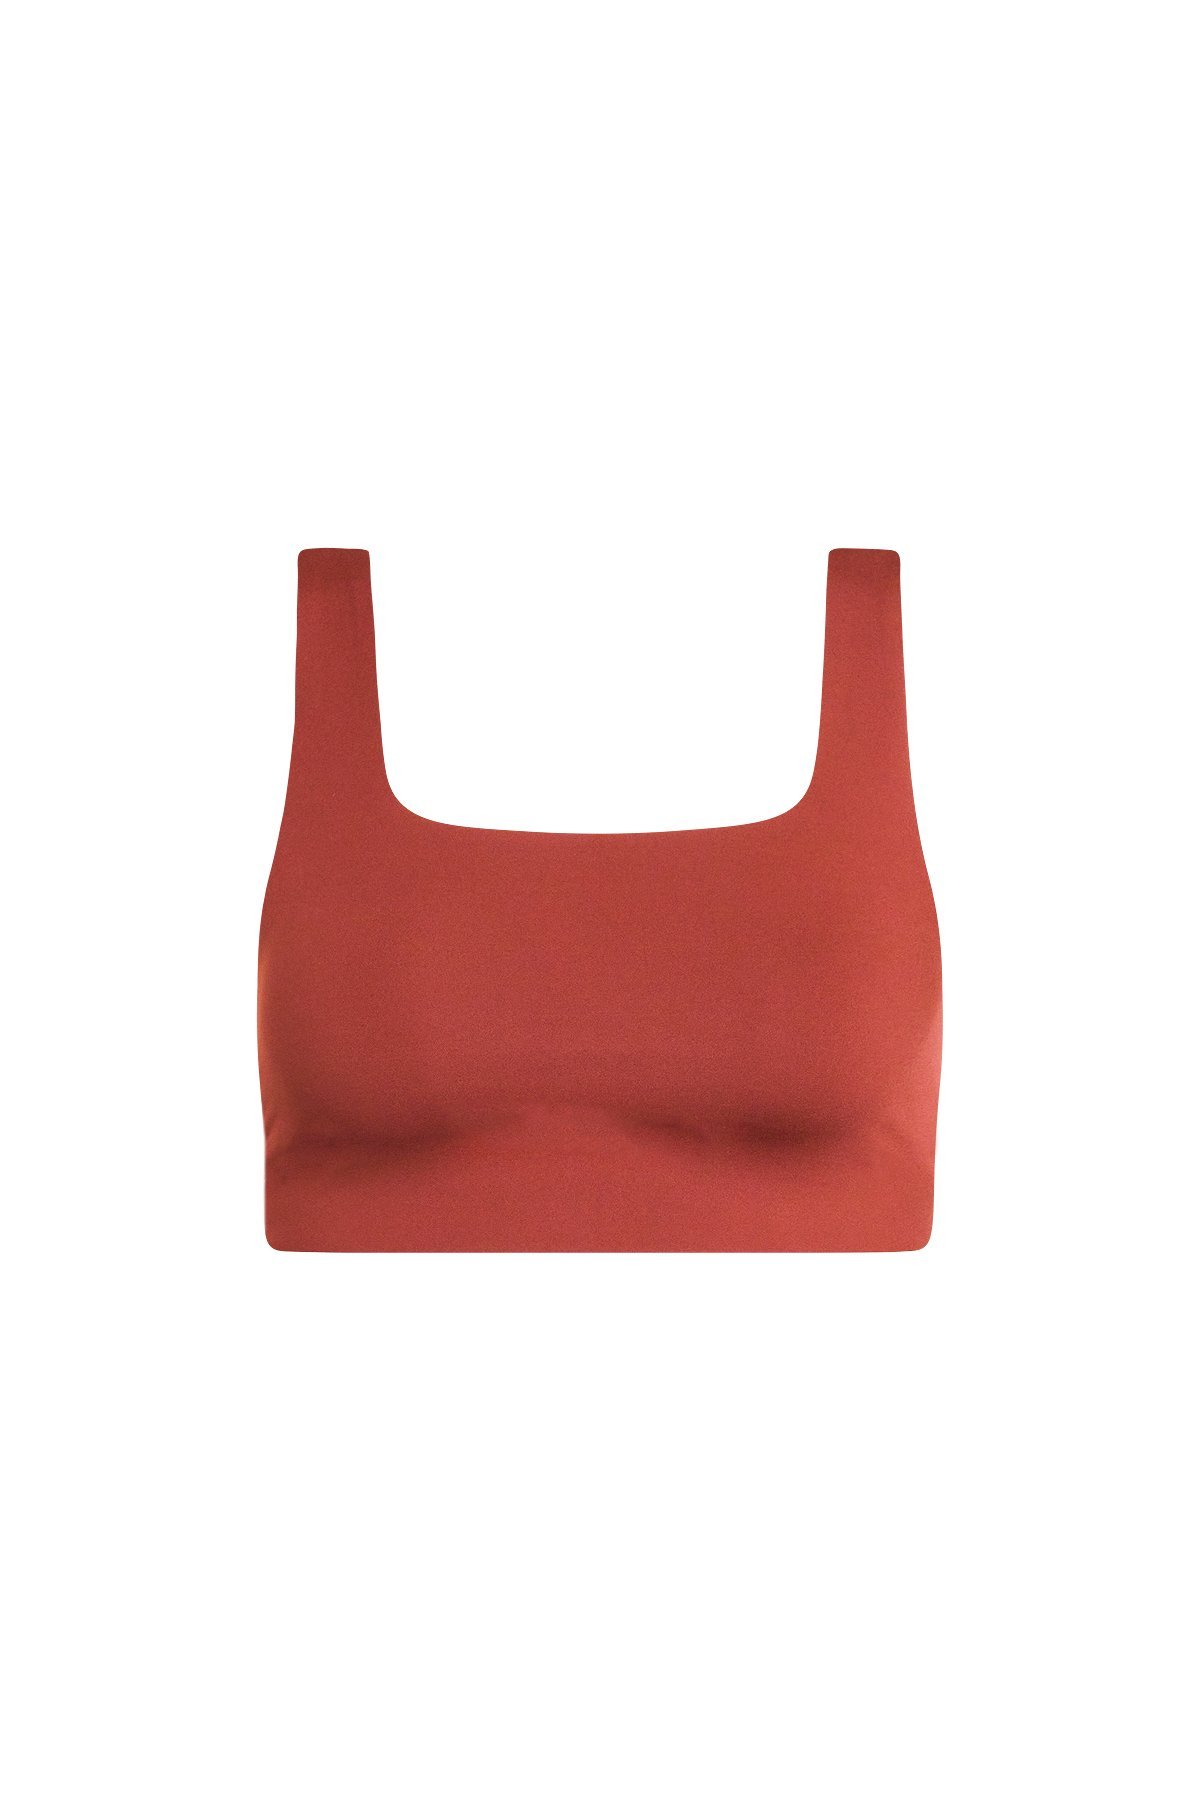 Girlfriend Collective Tommy Bra Square neck - Made from Recycled Plastic Bottles, Ember / XL